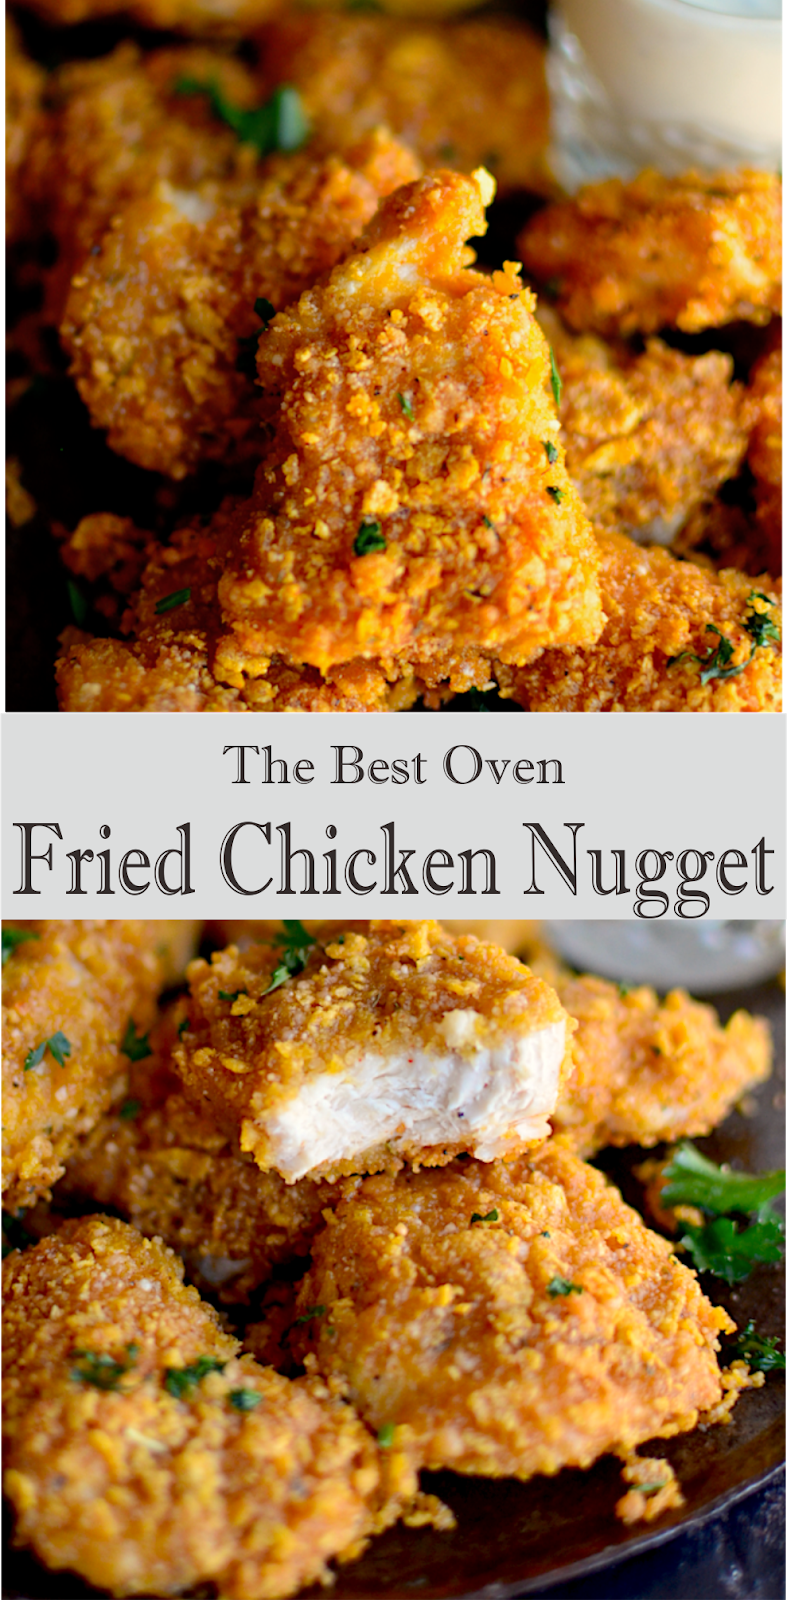 The Best Oven Fried Chicken Nugget | Amzing Food